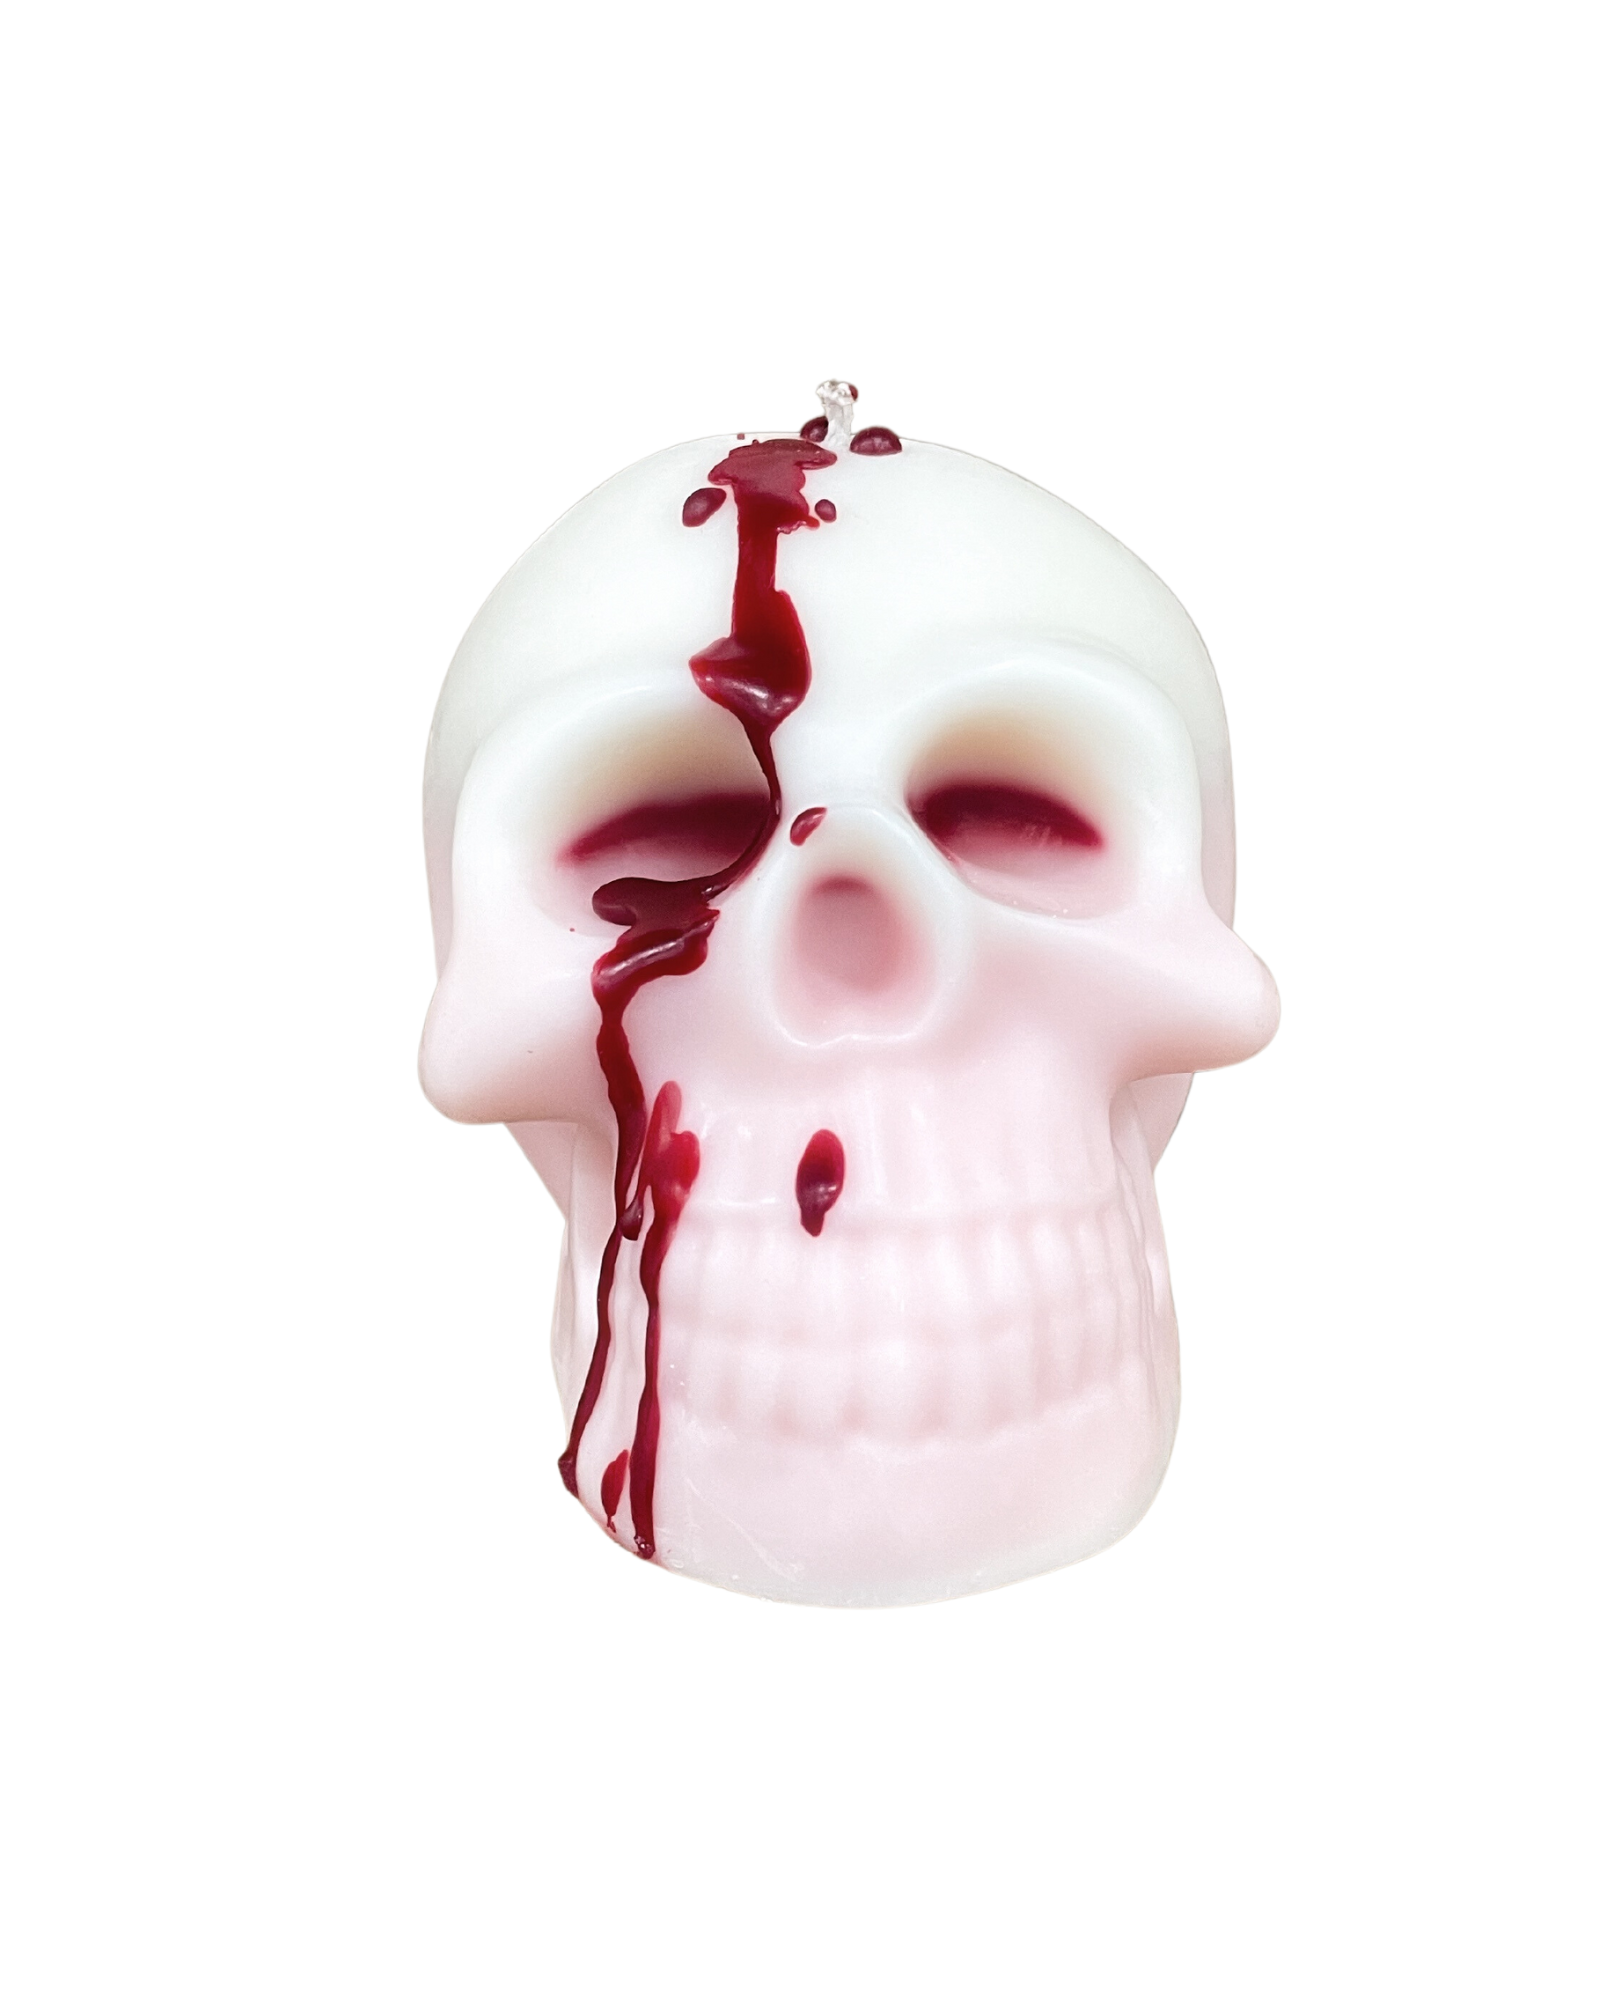 Bleeding Skull Soy Wax Pillar Candle is made with 100% natural soy wax. With a unique blend of rich berries, crisp apple, warm amber, and smooth sandalwood, our candle promises a delightful fragrance that is free of parabens and phthalates. Plus, with a cotton wick, we ensure an optimal burn every time. www.farmhousecharmcandles.com